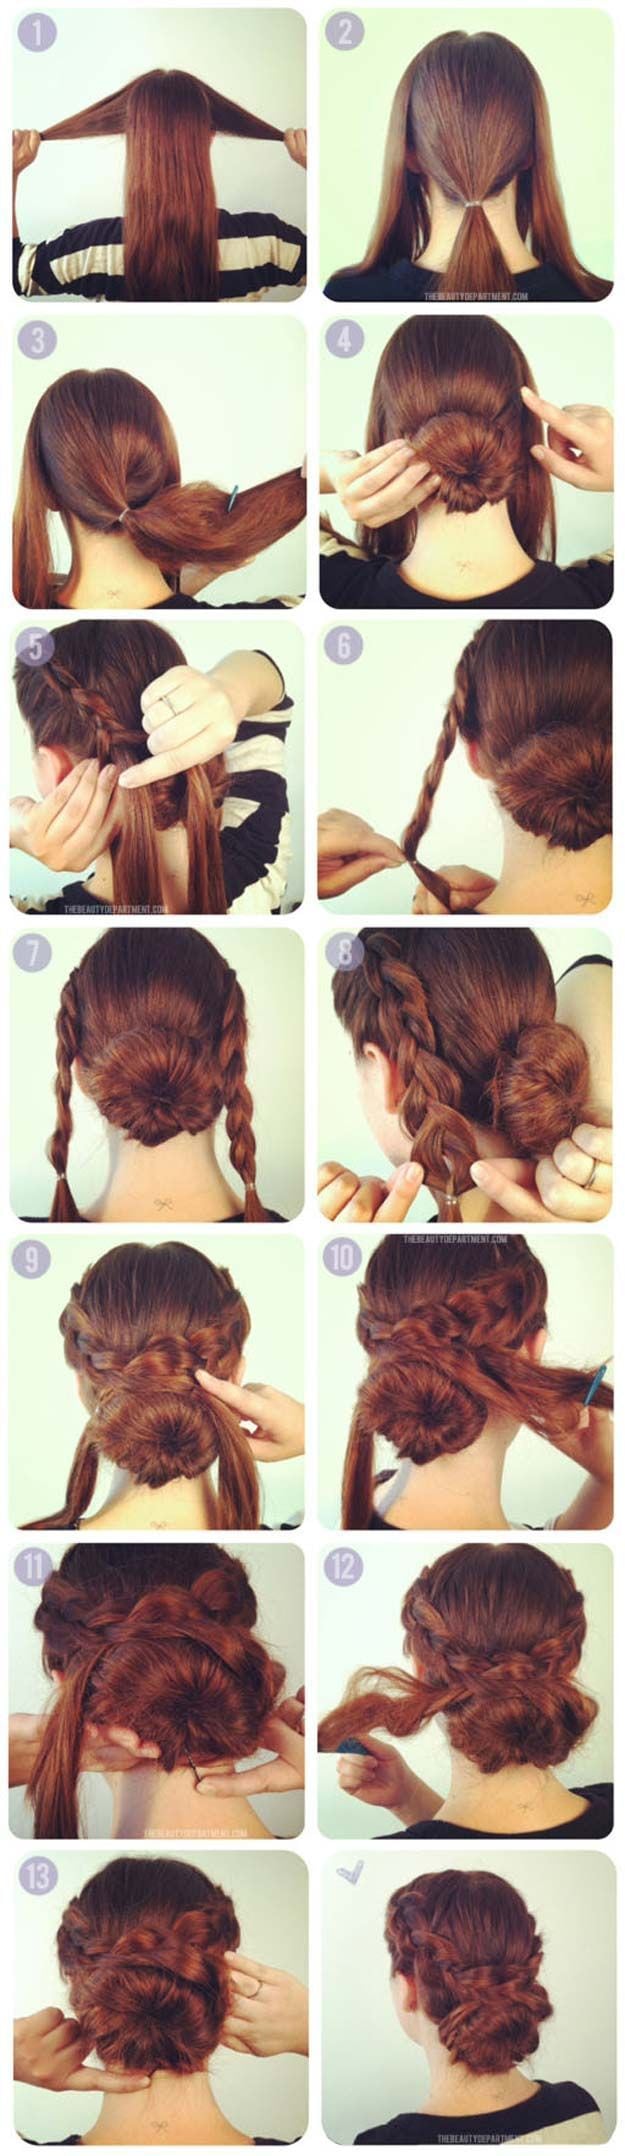 [ad_1]

Best Hairstyles for Long Hair – Hot Crossed Bun – Step by Step Tutorials for Easy Curls, Updo, Half Up, Braids and Lazy Girl Looks. Prom Ideas, Special Occasion Hair and Braiding Instructions for Teens, Teenagers and Adults, Women and…